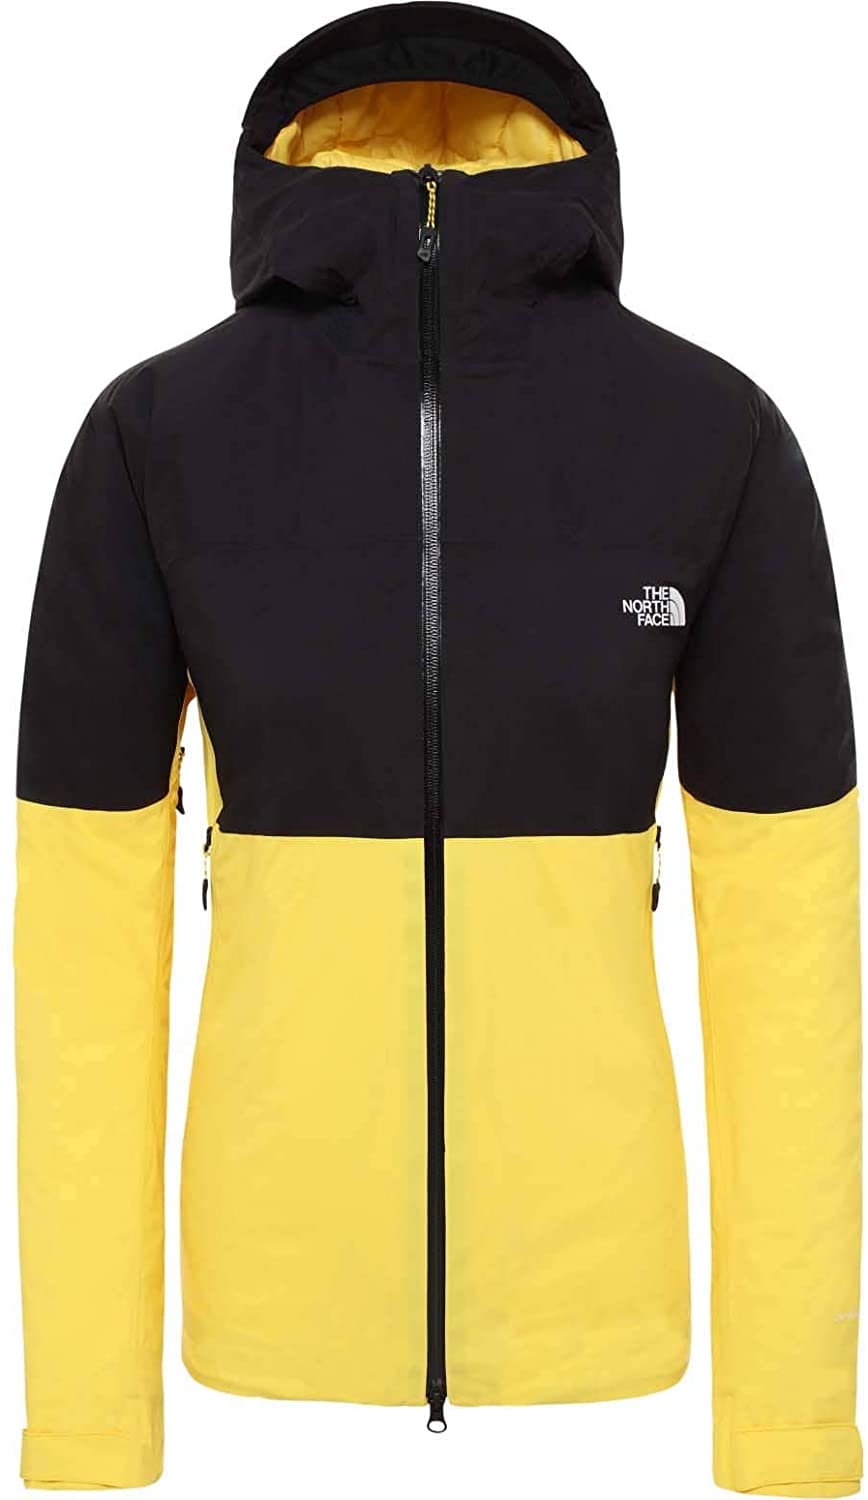 The North Face IMPENDOR INSULATED JACKET - Giacca outdoor invernale Primaloft Black Yellow